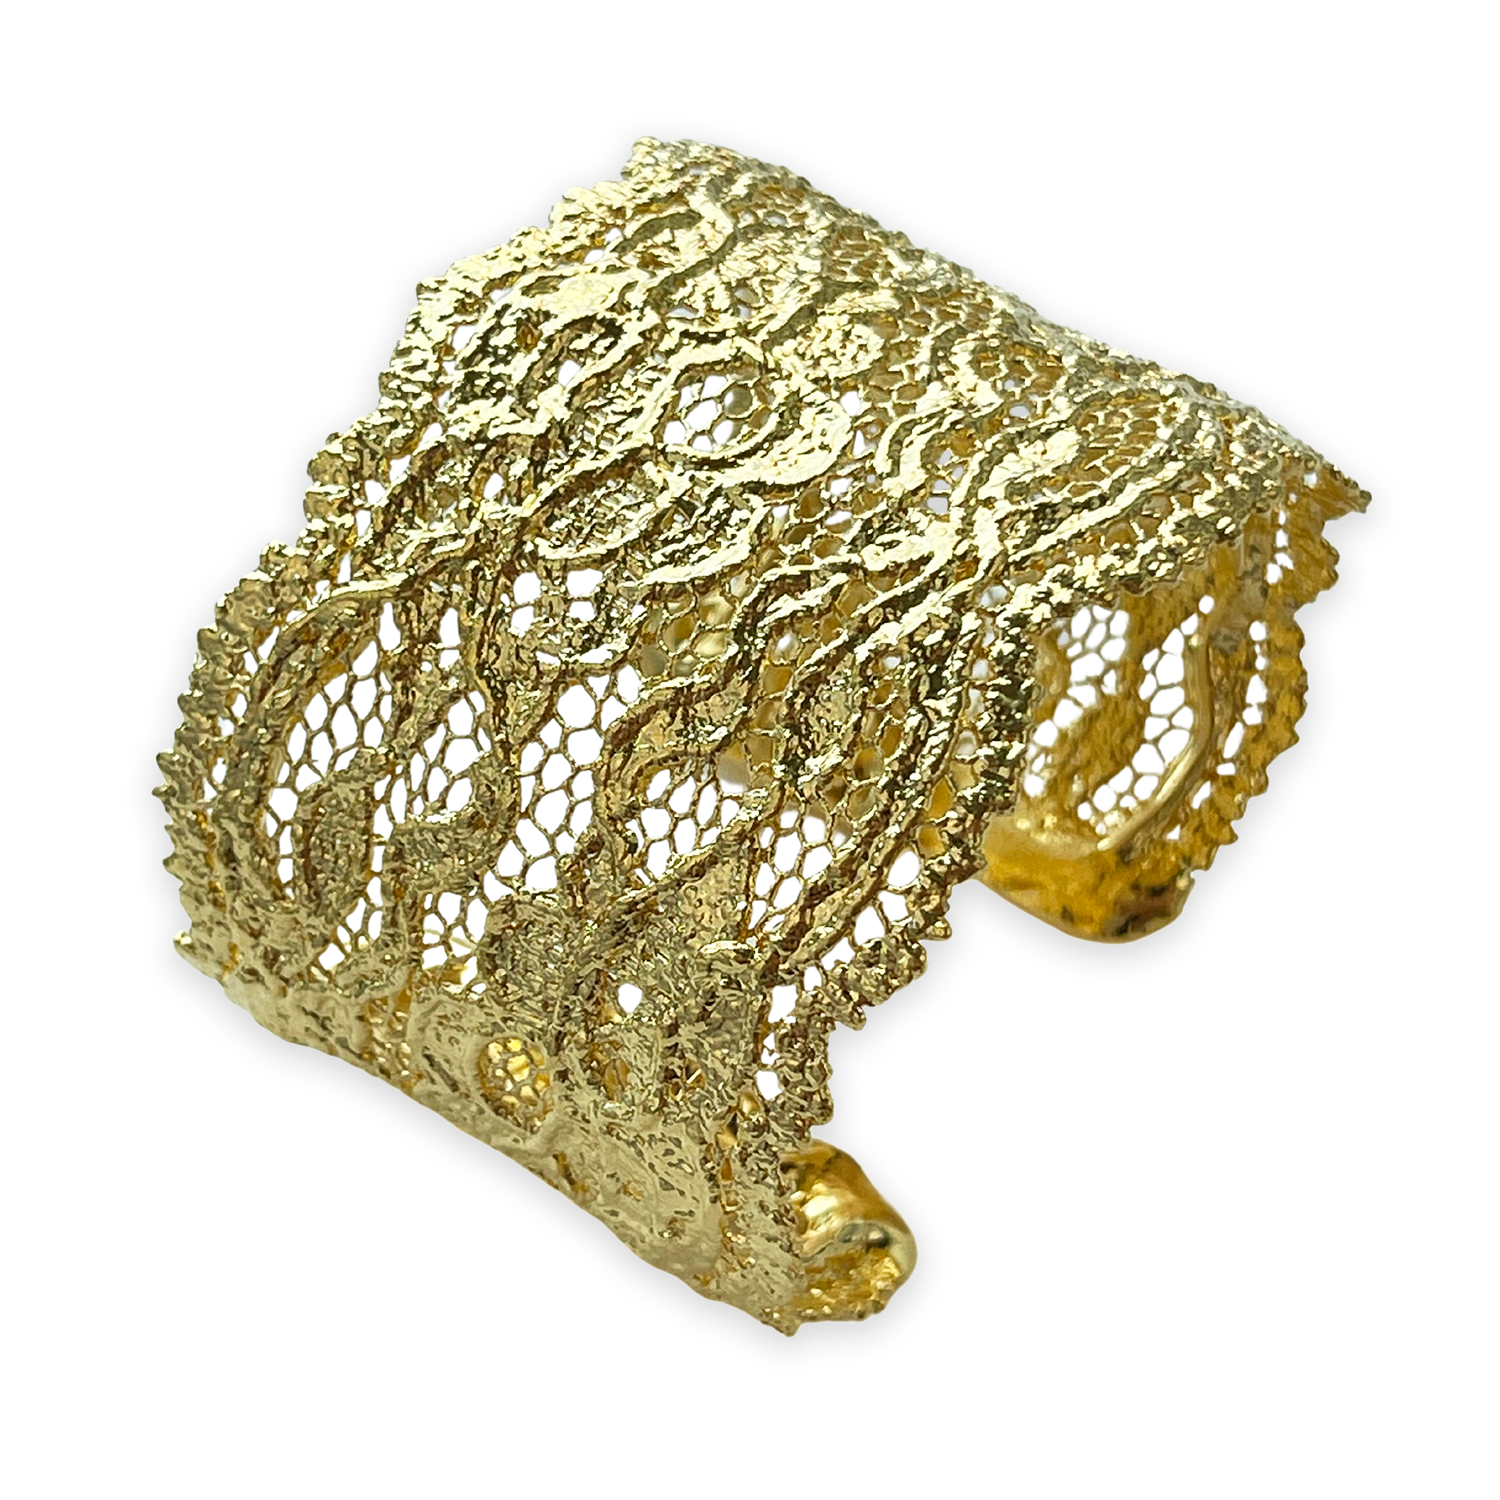 Lace cuff bracelet made from antique double scalloped lace dipped in 24k gold.